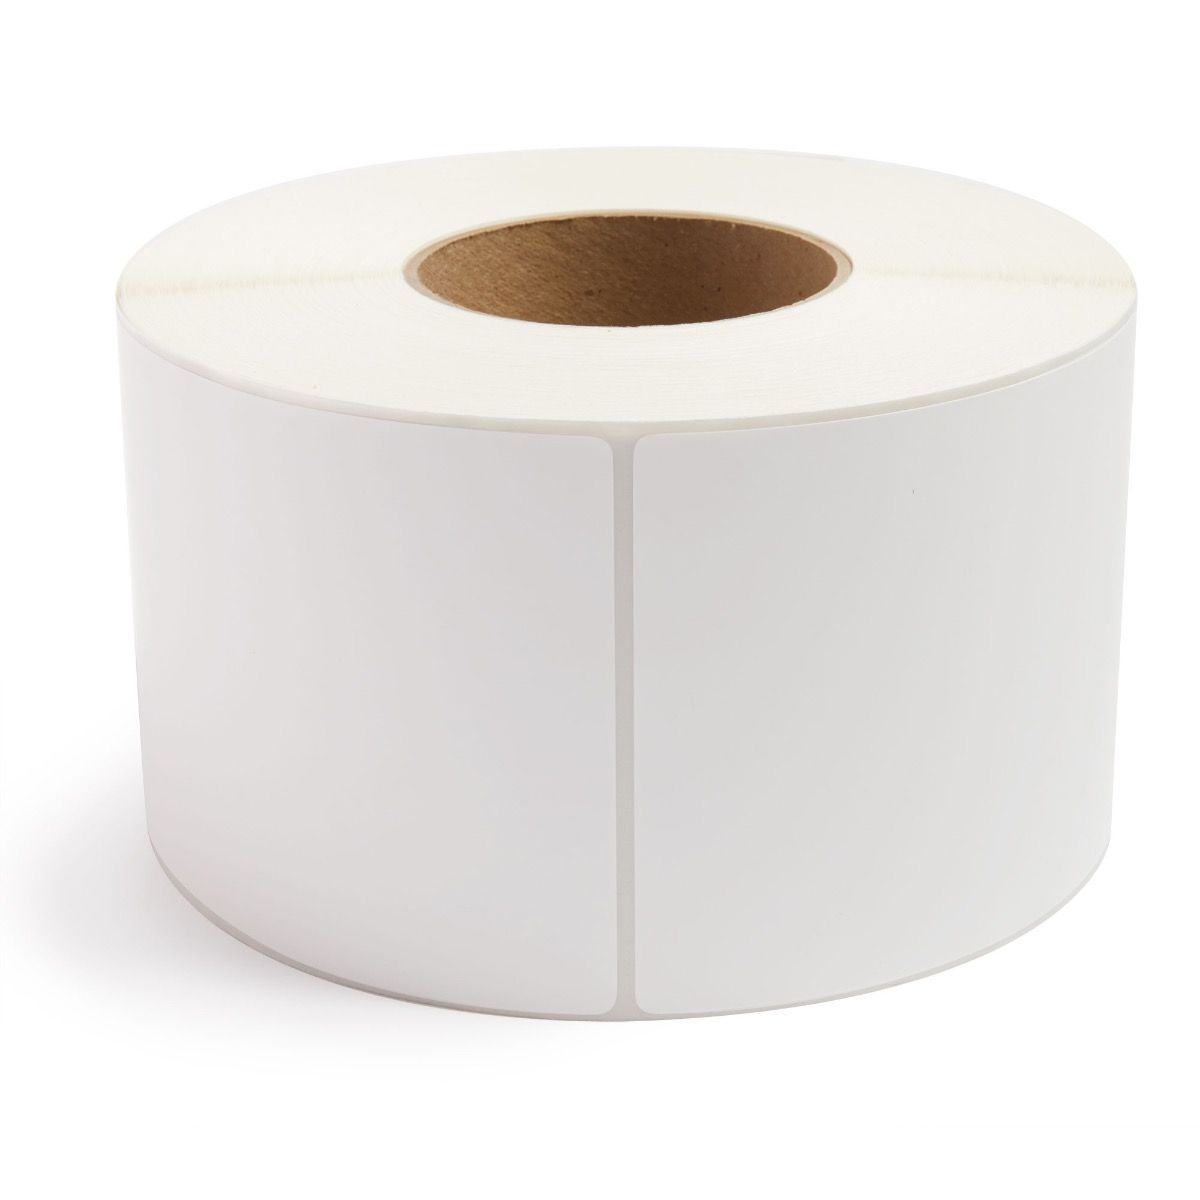 Label, 4x6 thermal transfer,
white no perf for machine
application, 3&quot;core,
1000/roll, 4 rls/cs